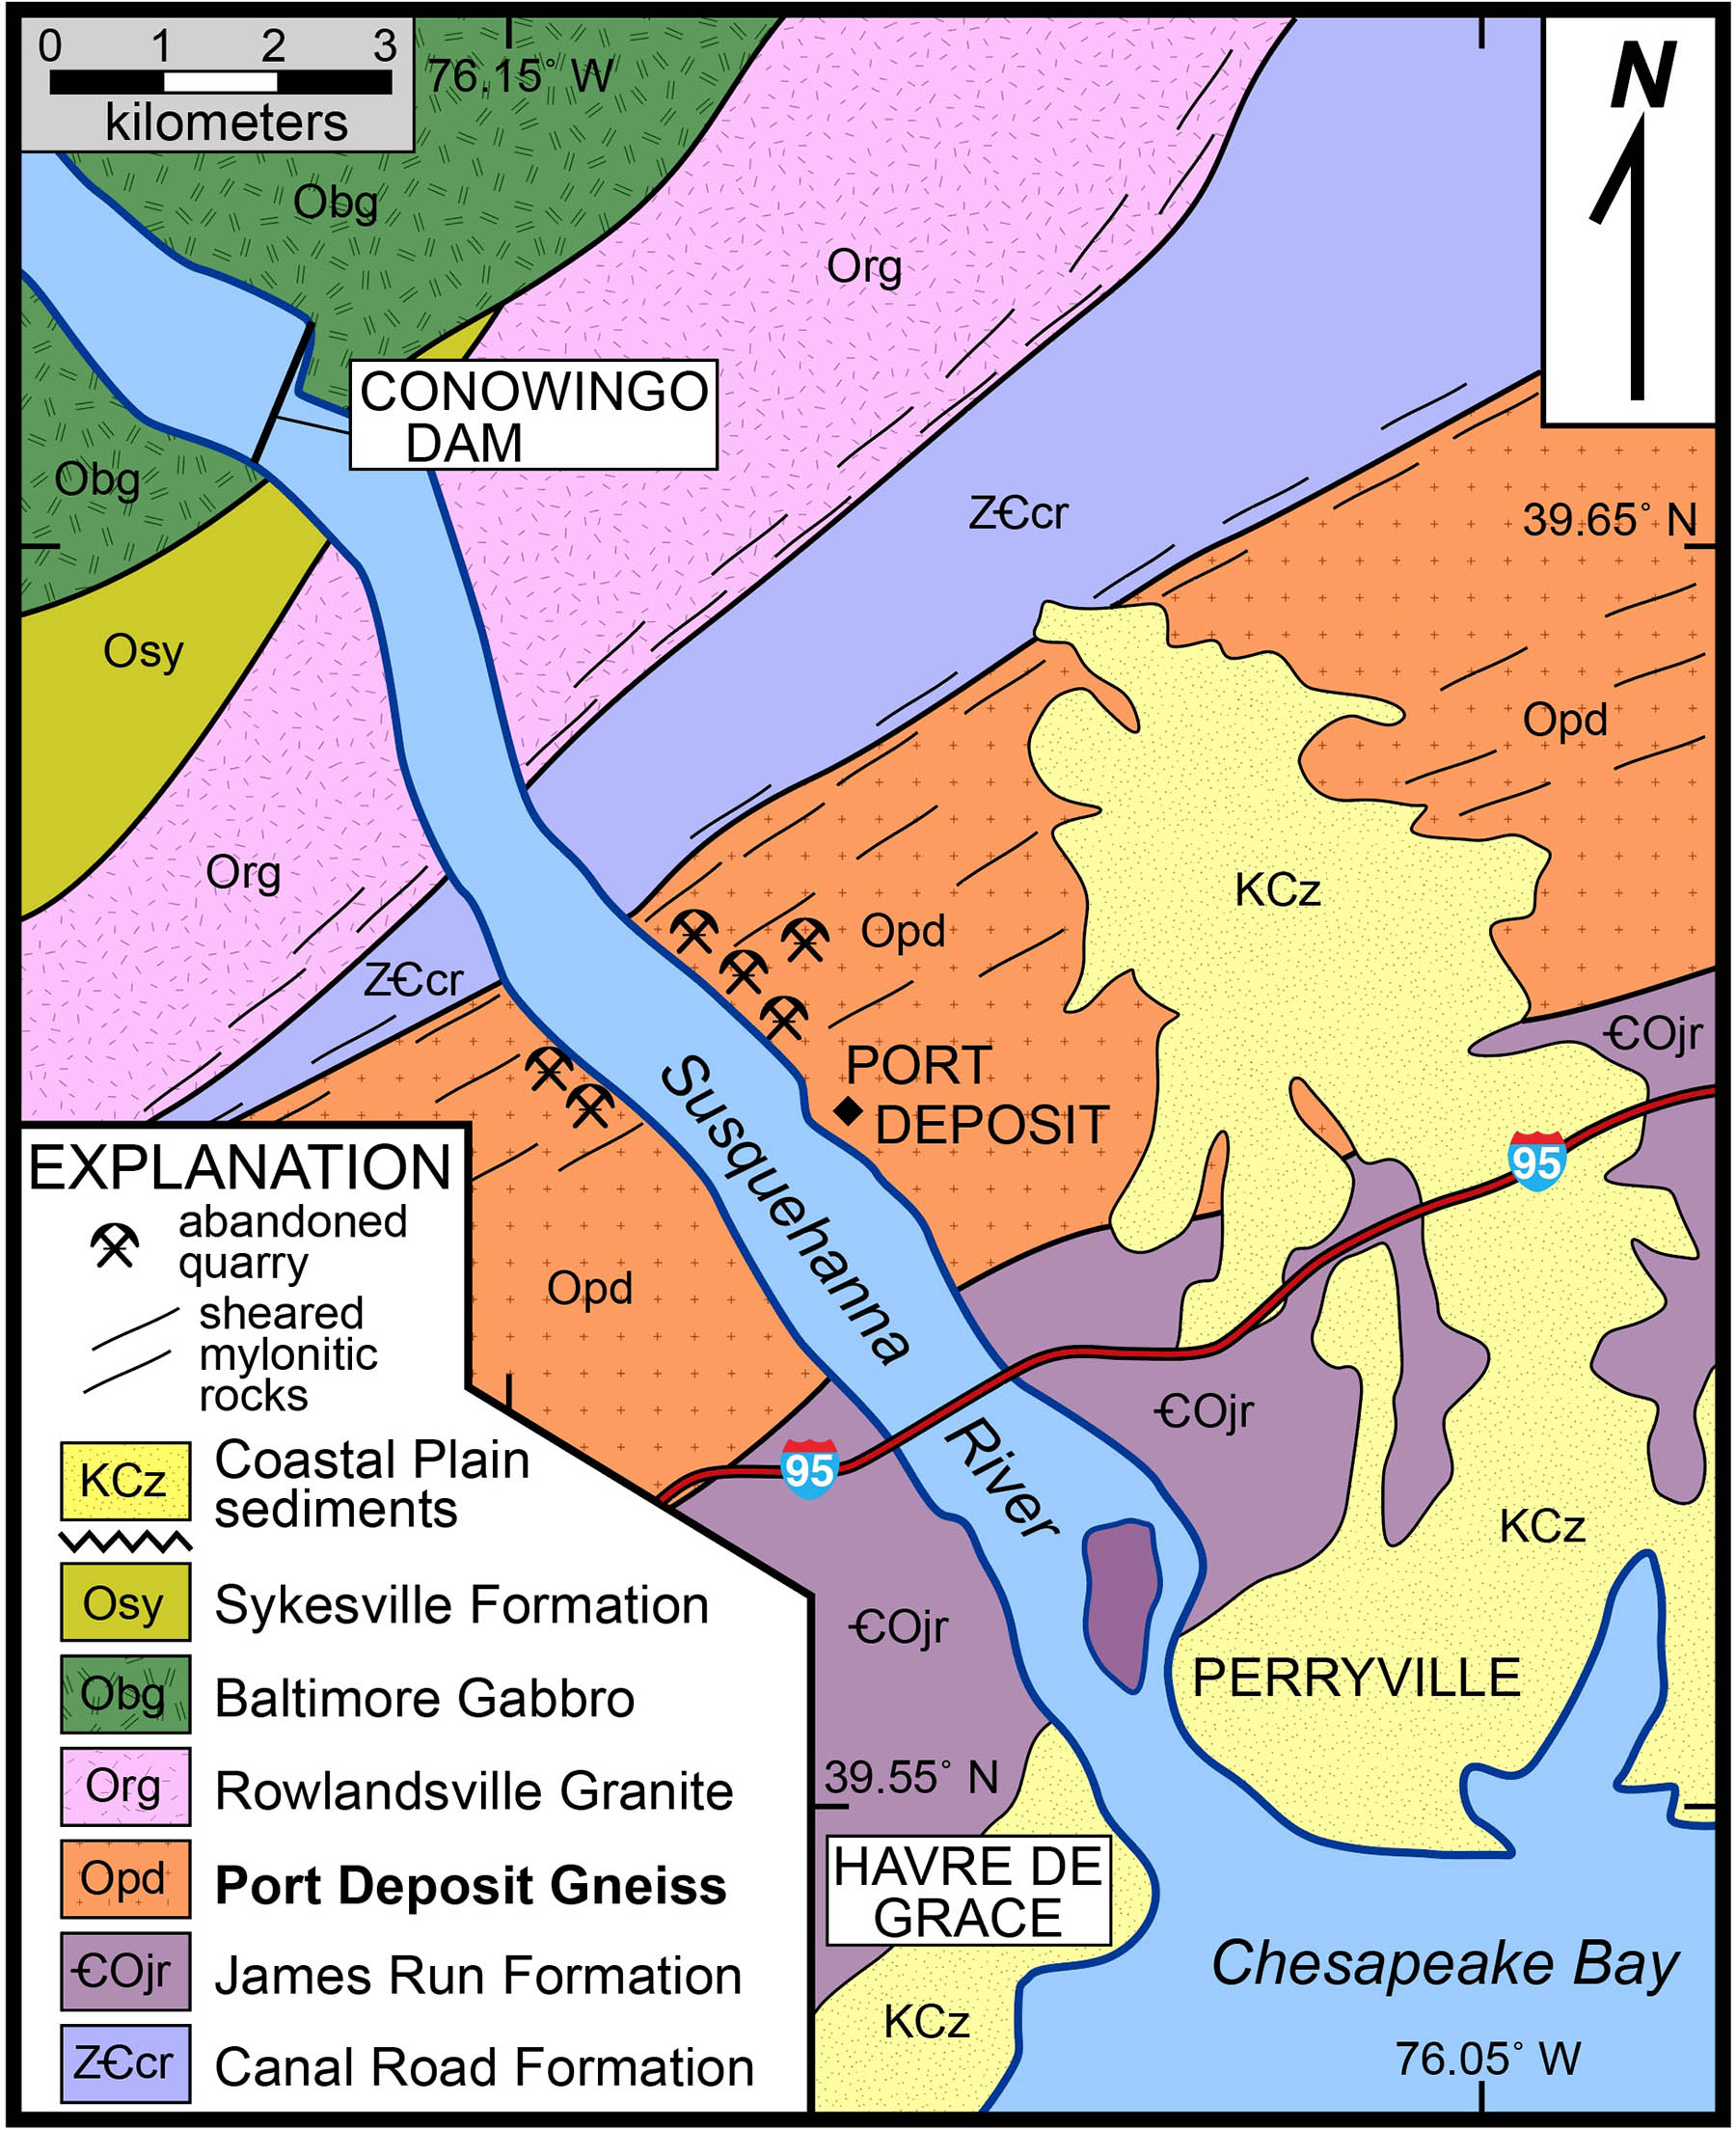 A geologic map of the Port Deposit area.